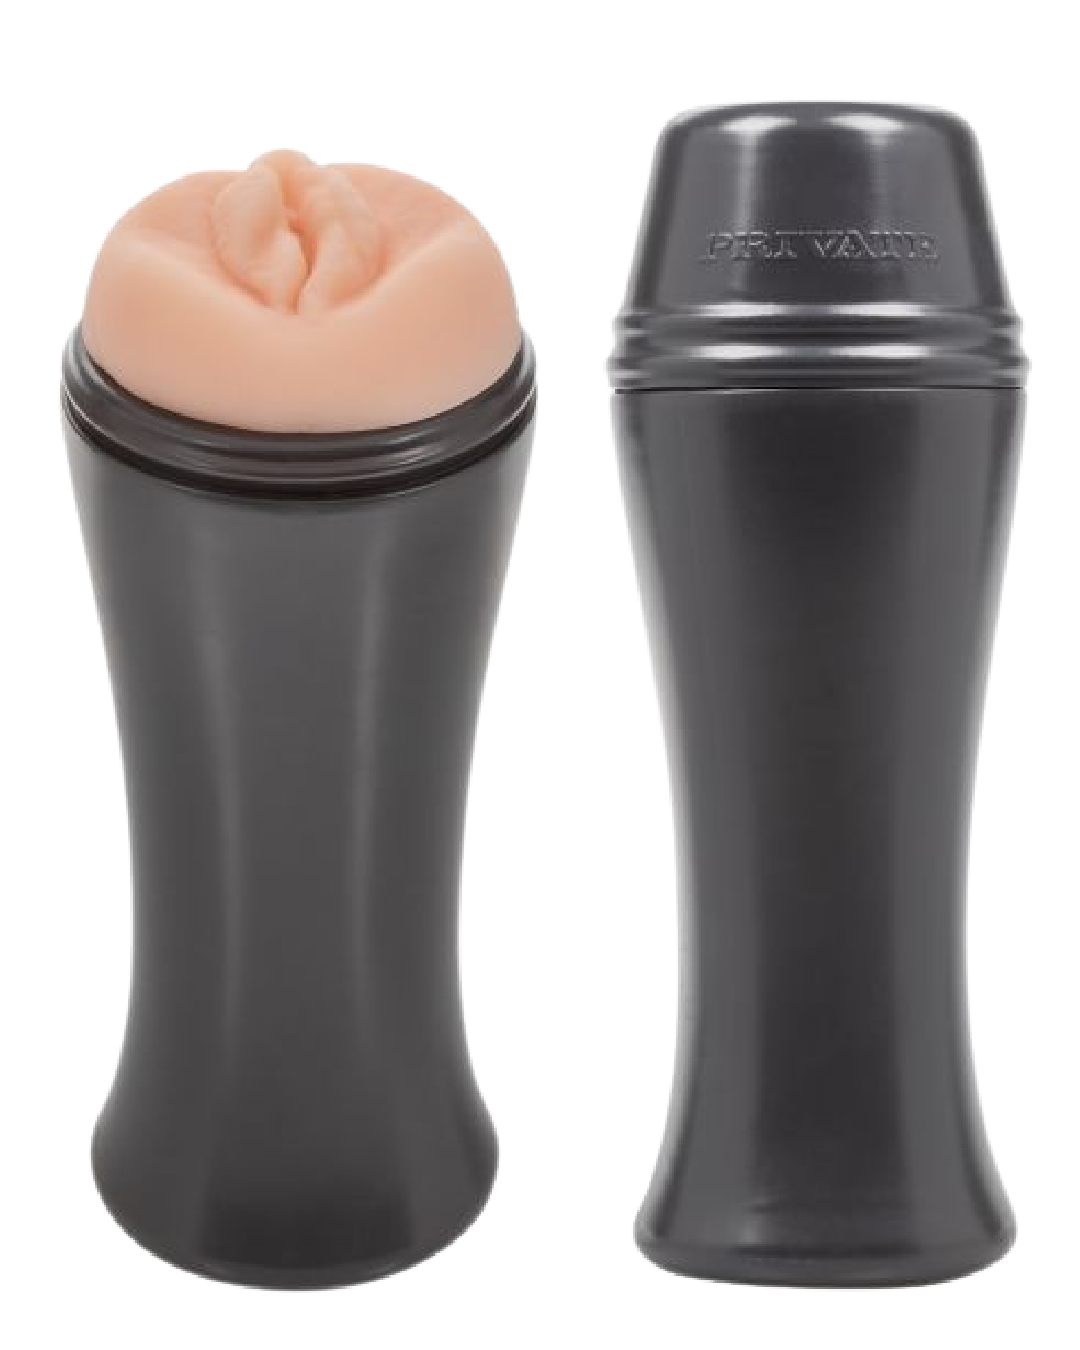 Private Horny Cougar to Go Realistic Travel Stroker (Vagina)  two views - one with and one without the lid